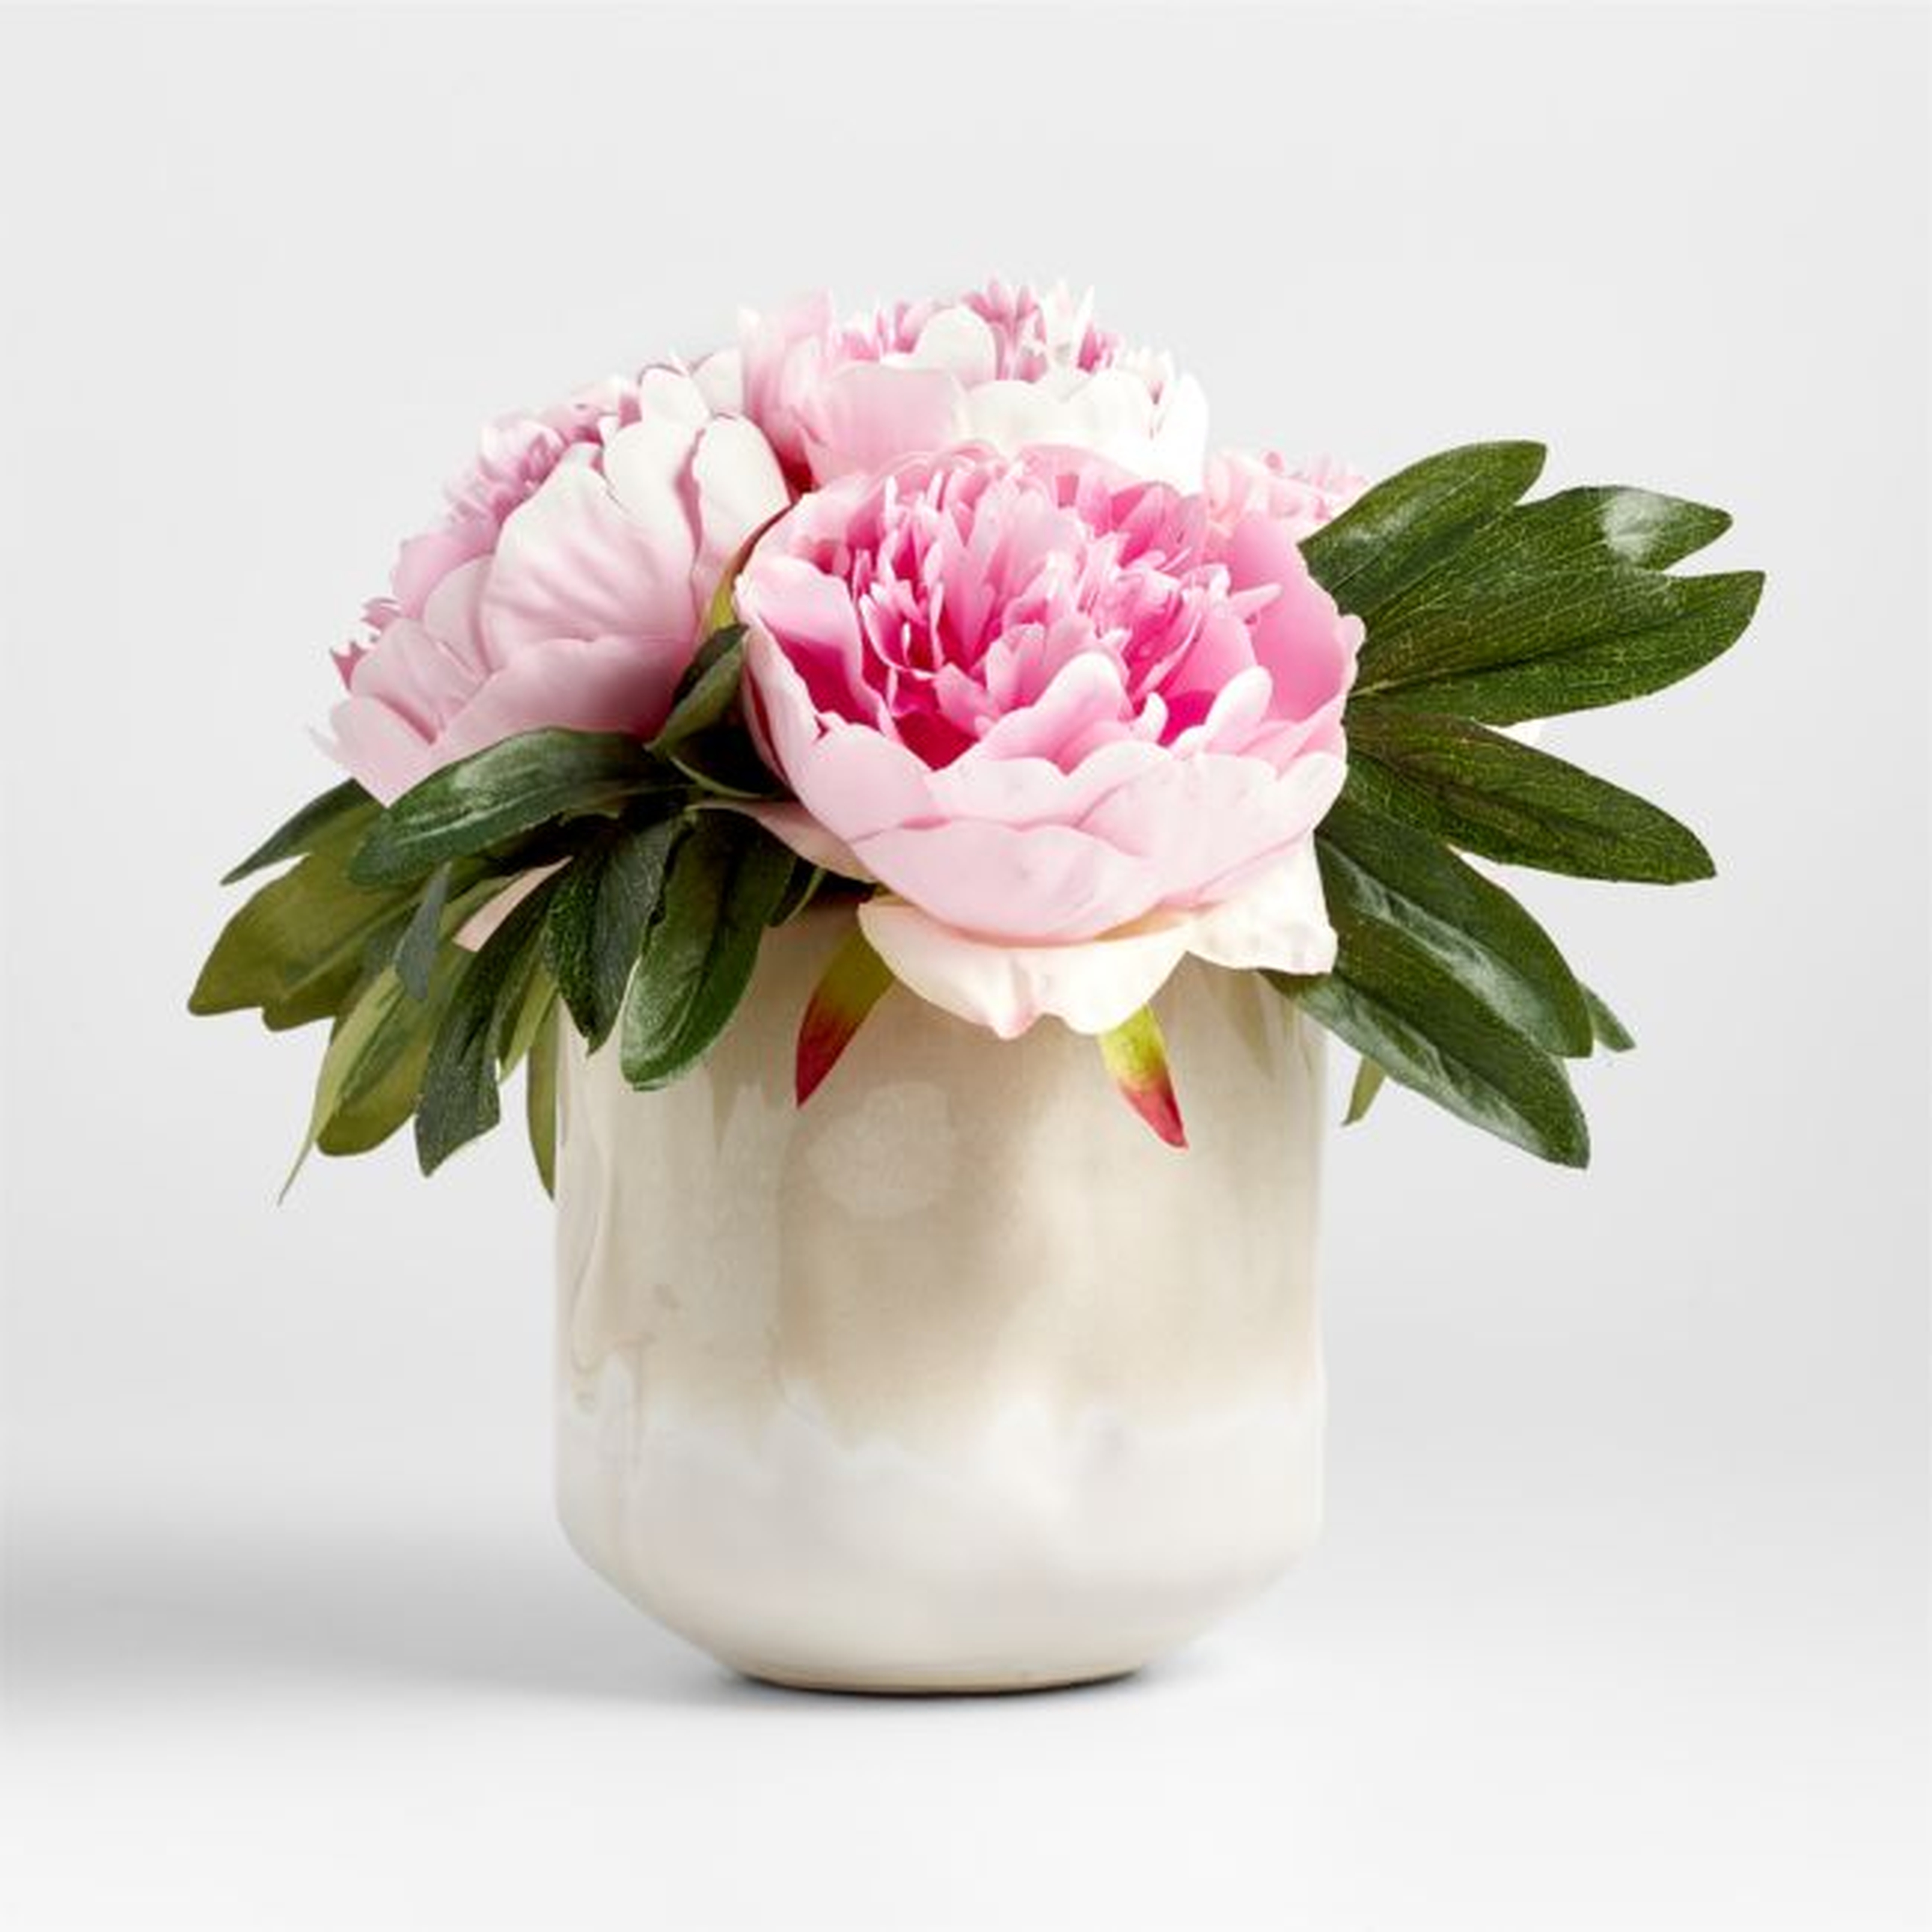 Faux Pink Peony Floral Arrangement - Crate and Barrel